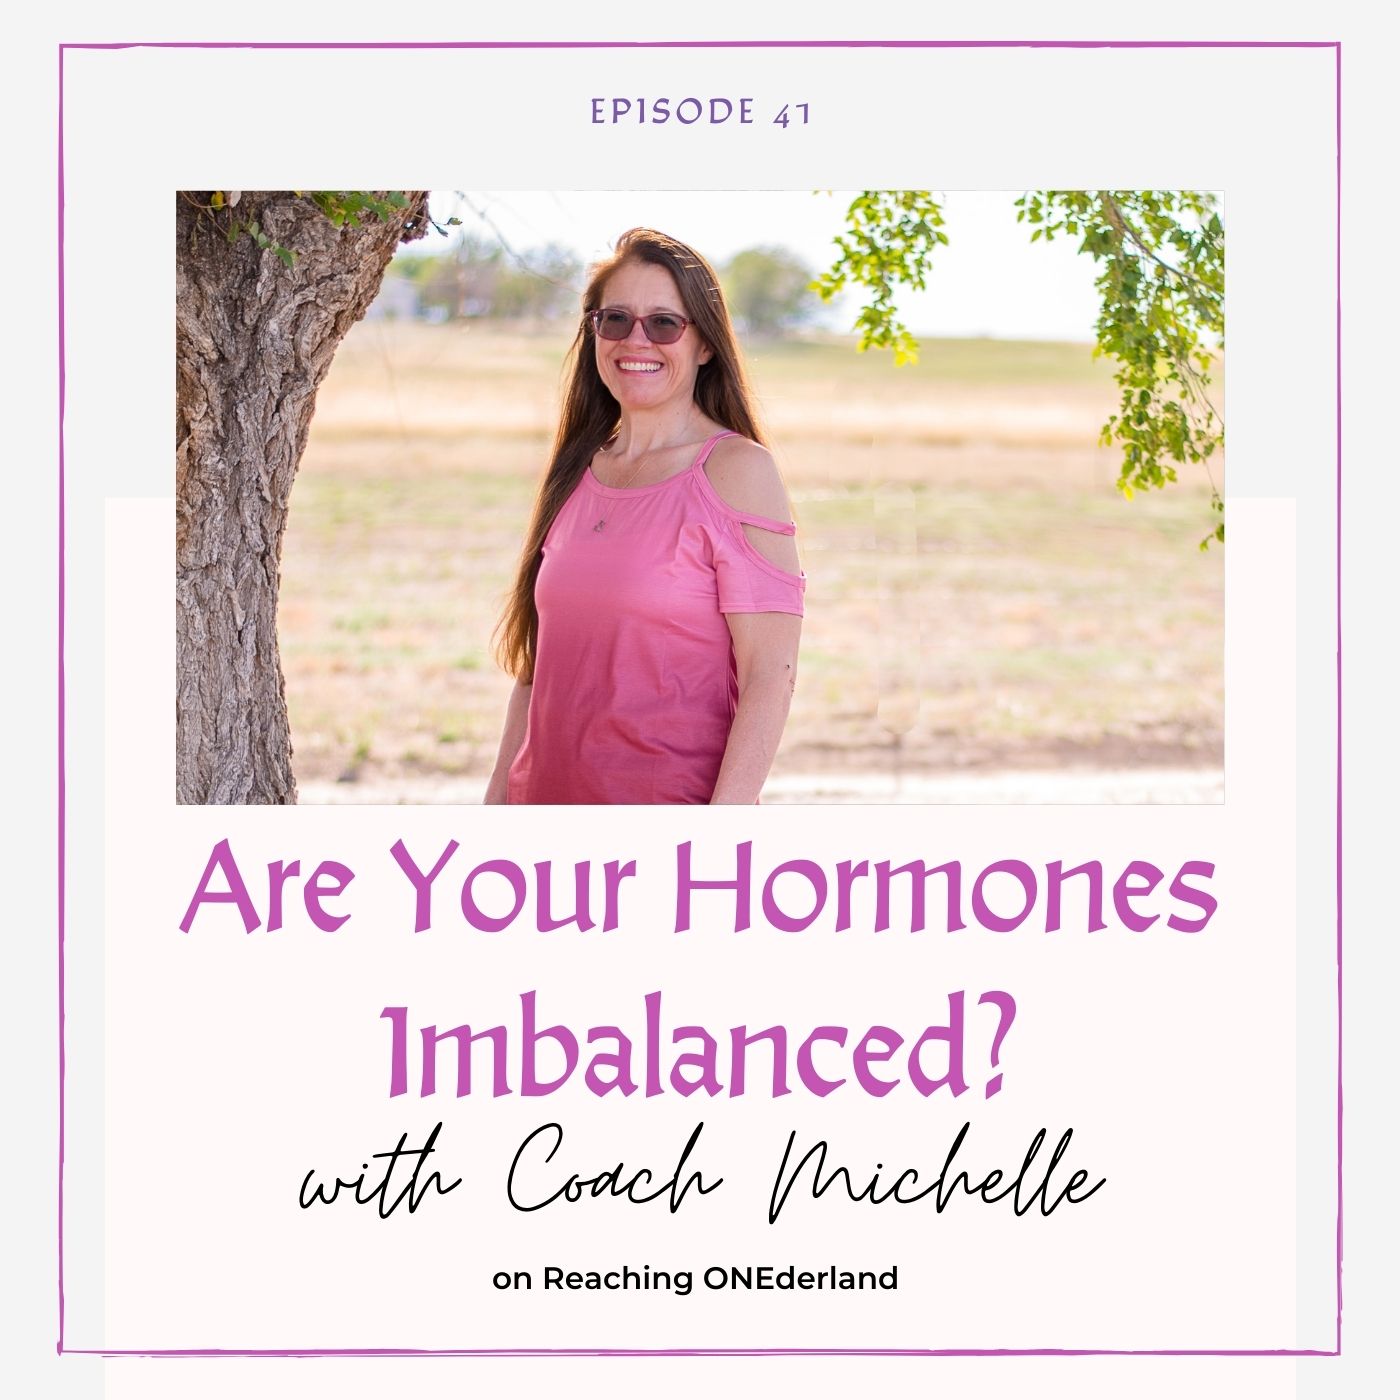 Are Your Hormones Imbalanced?